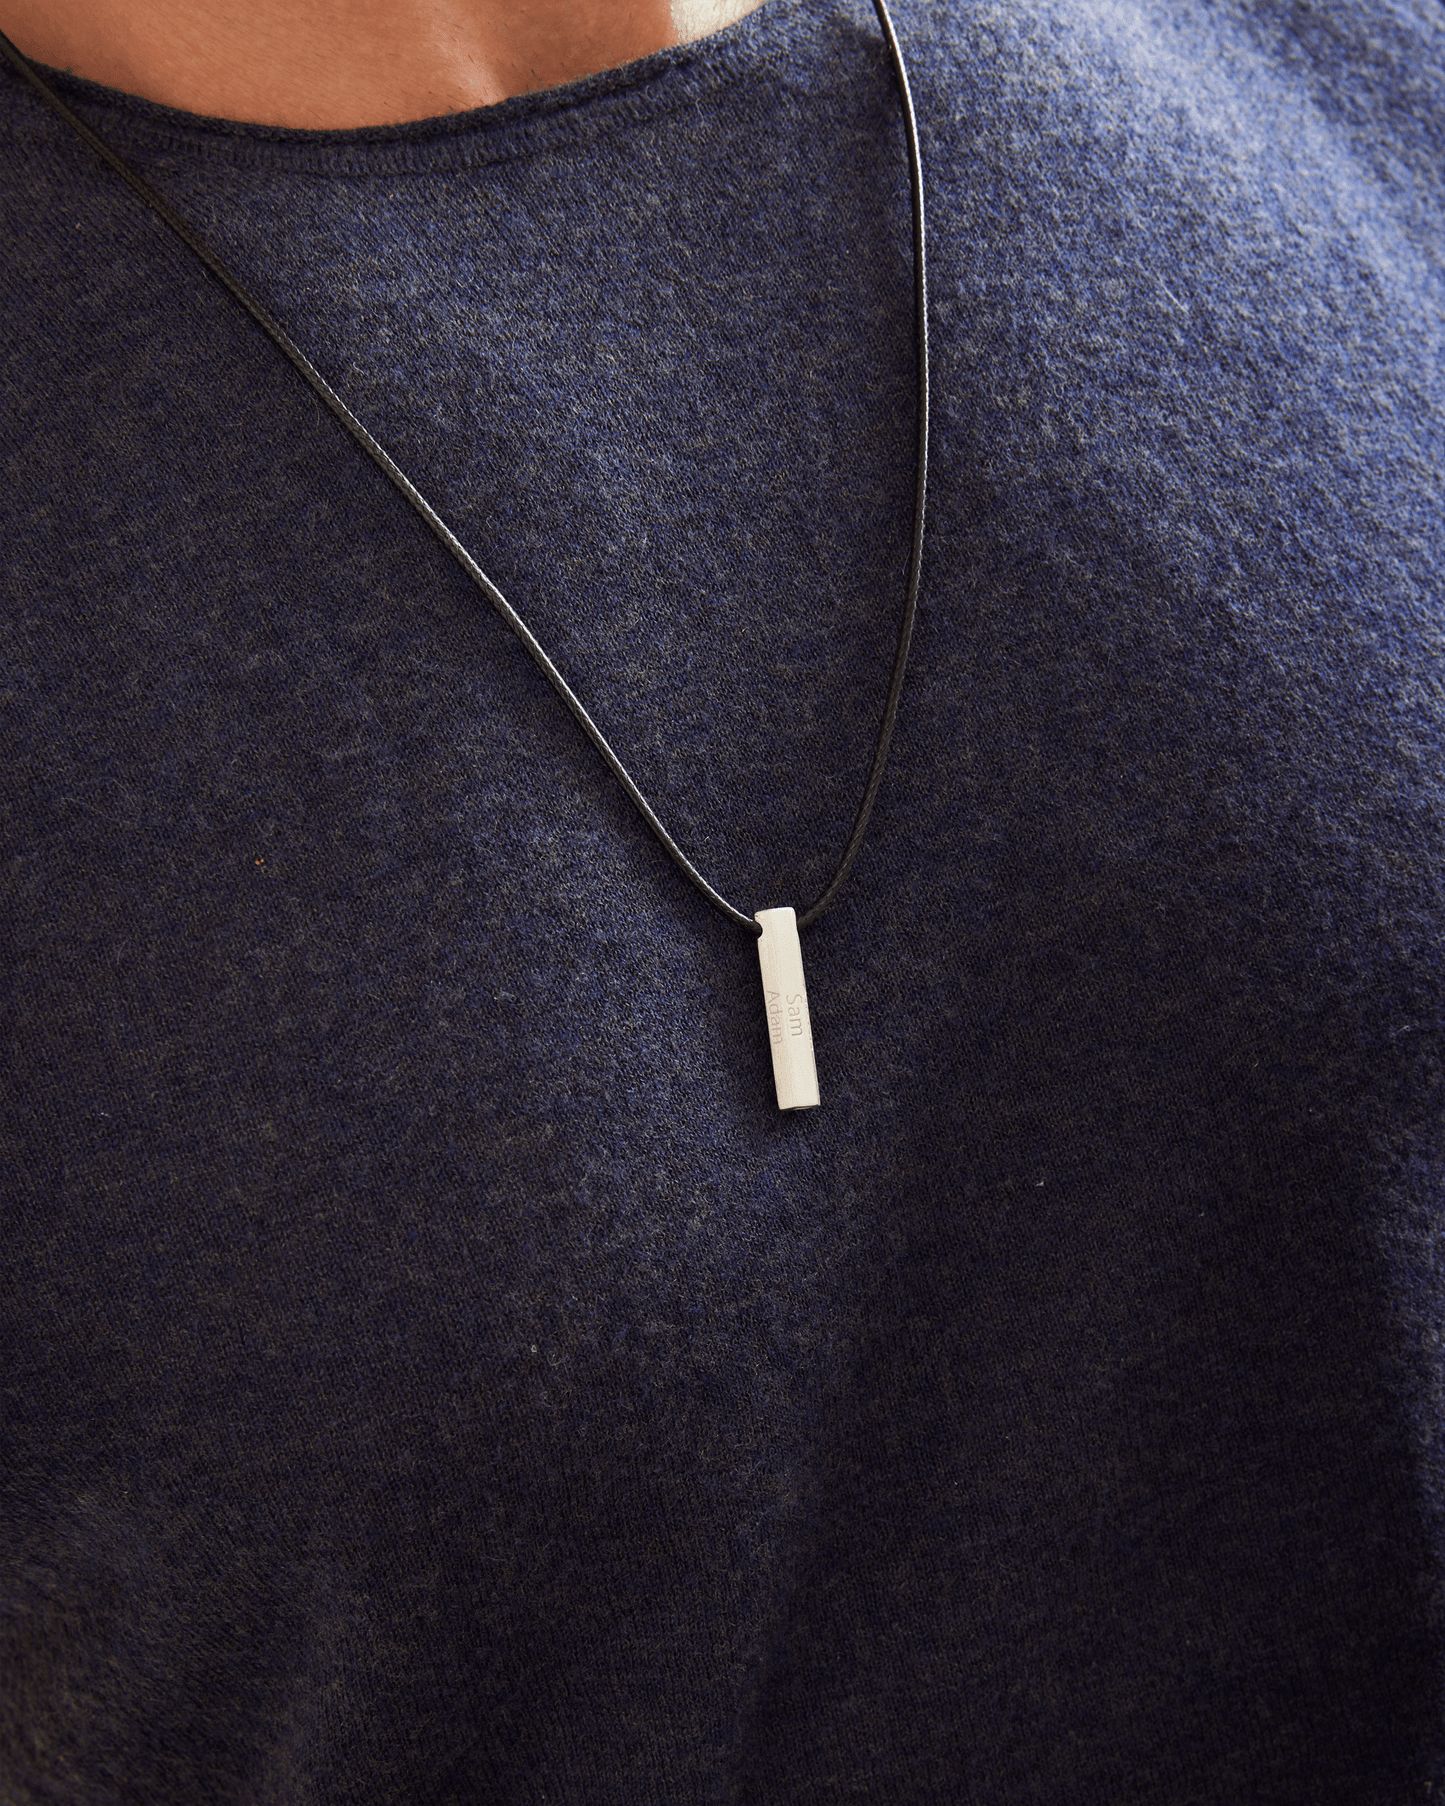 Apex Bar Necklace - 925 Sterling Silver Necklaces magal-dev 